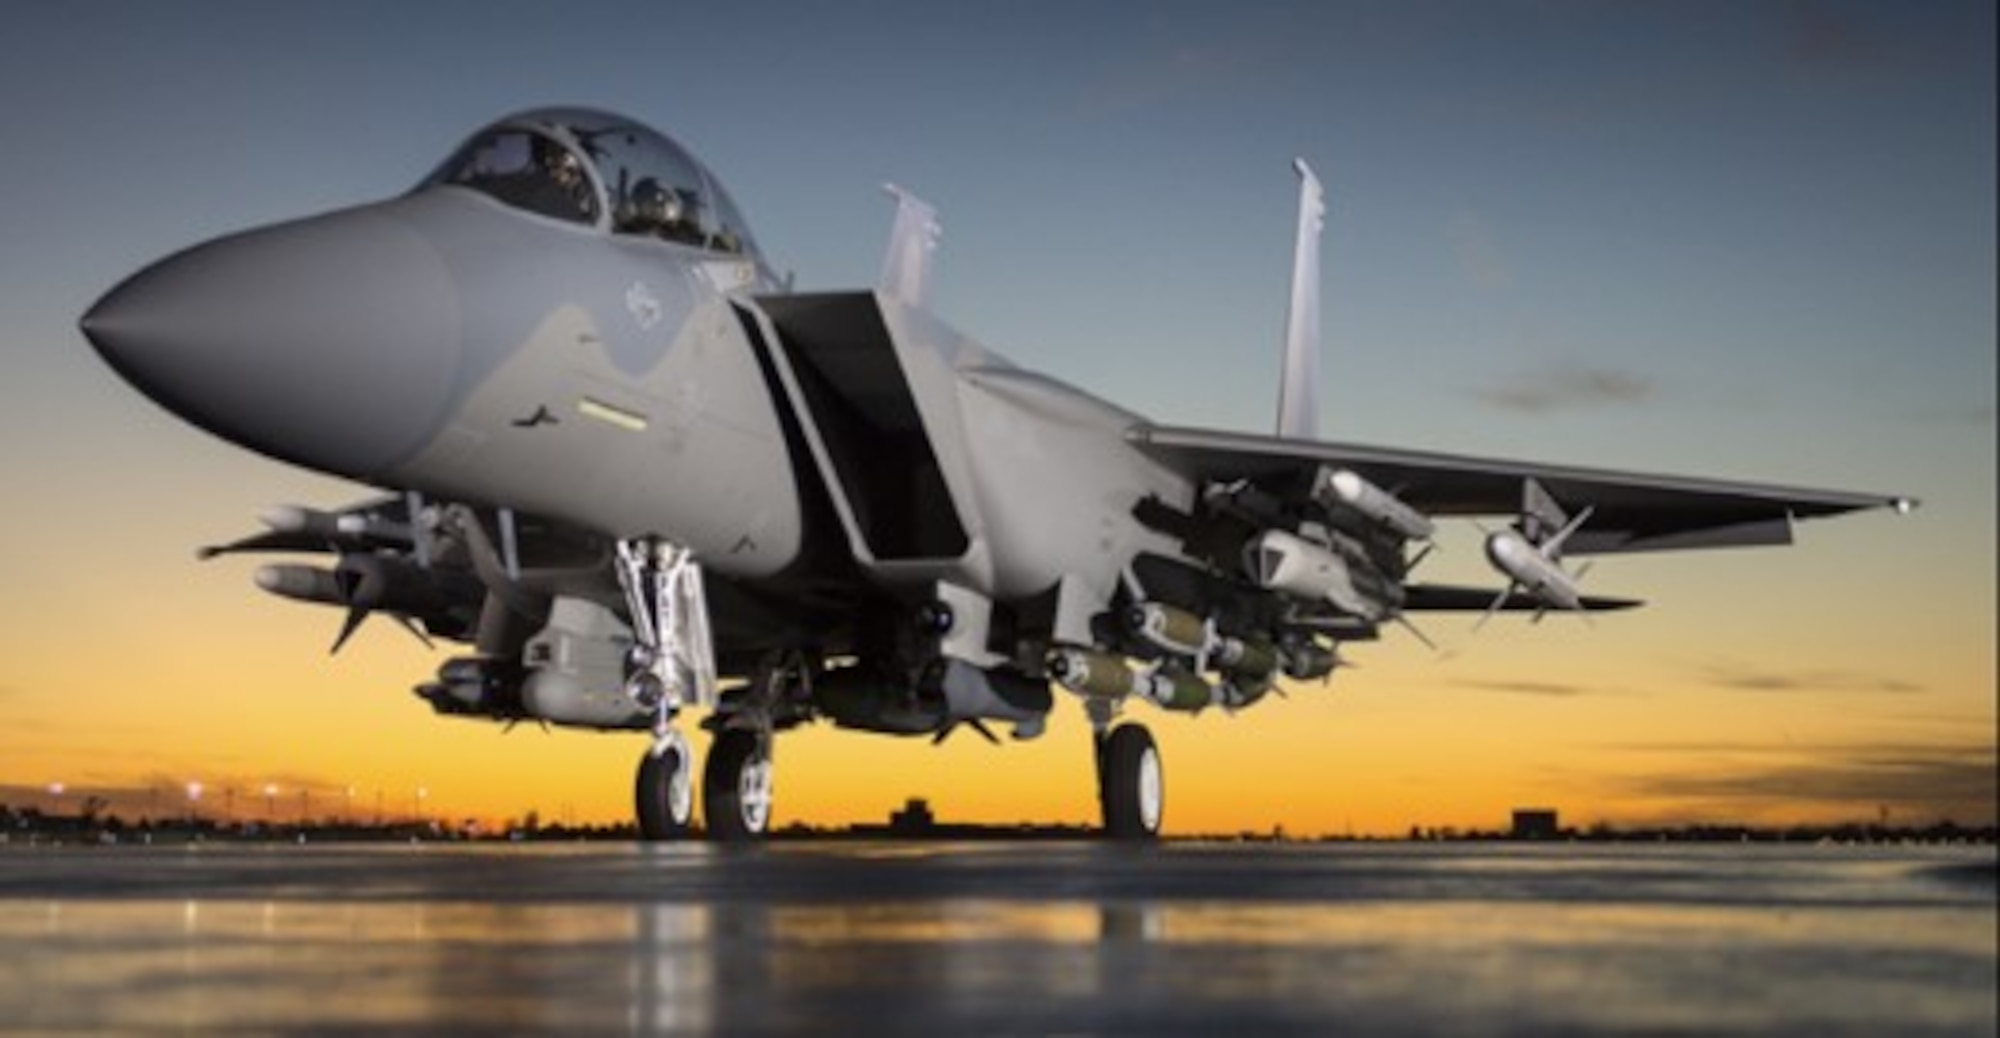 The United States Air Force is still purchasing new F-15 fighter aircraft. In July 2020, the Air Force awarded Boeing a contract to deliver the advanced version of the fighter, the F-15EX. The Air Force projects it will buy at least 144 F-15EX’s. Pictured is an F-15 preparing to taxi. (Courtesy photo)